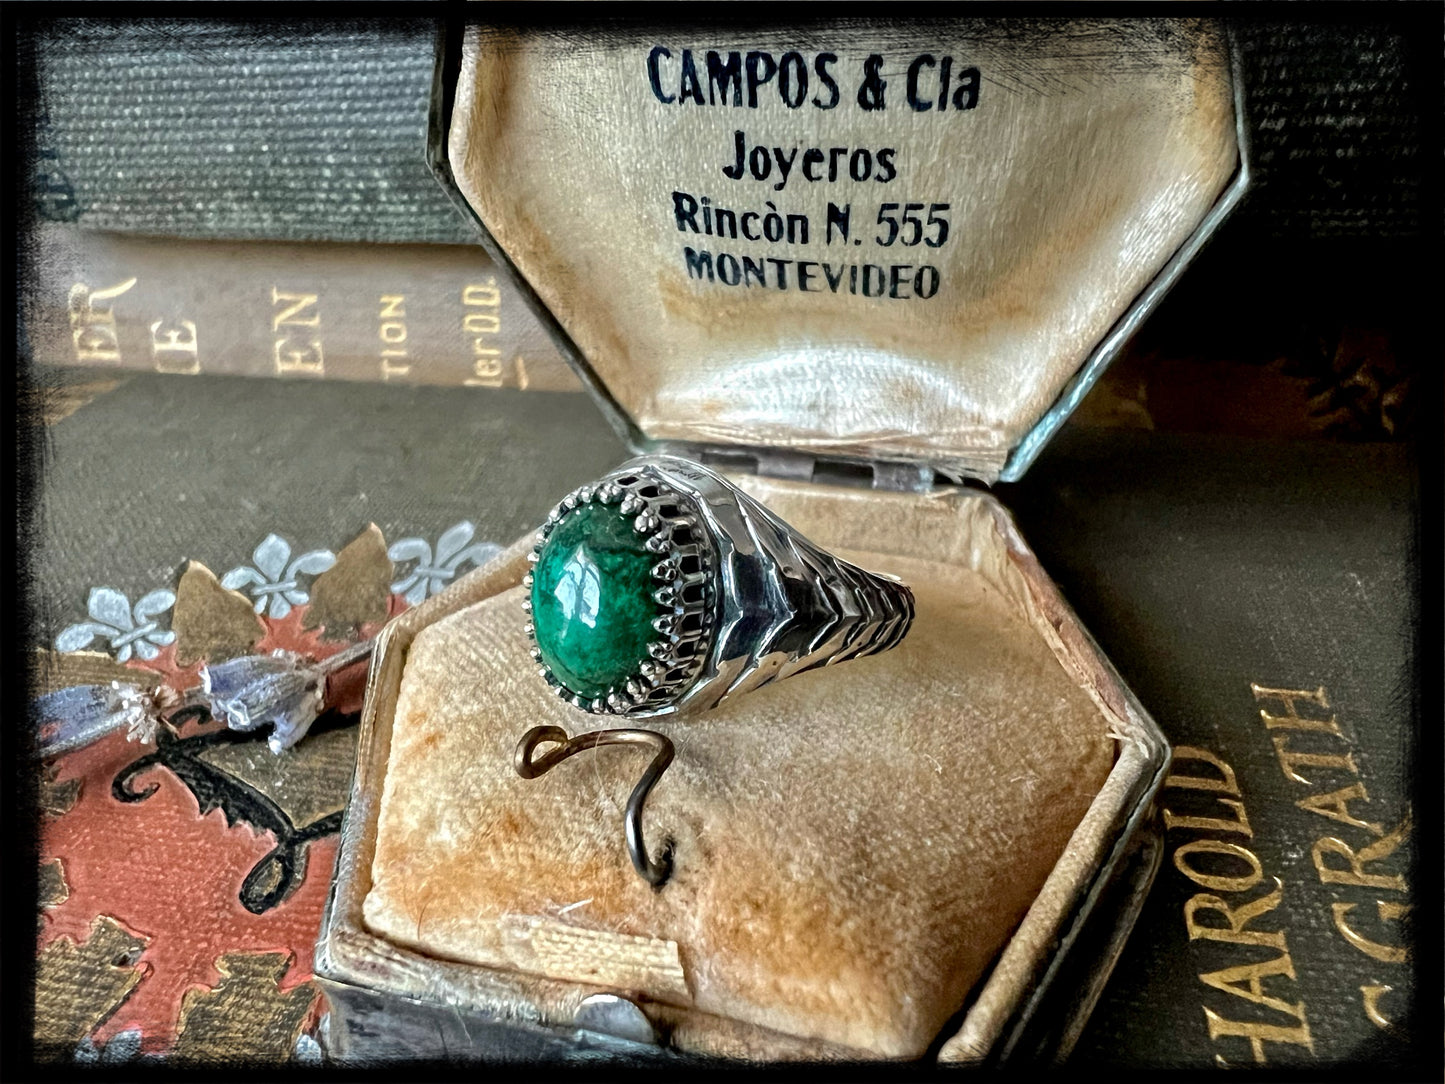 Chrysoprase set in Sterling Silver Scales Ring Size 6.75